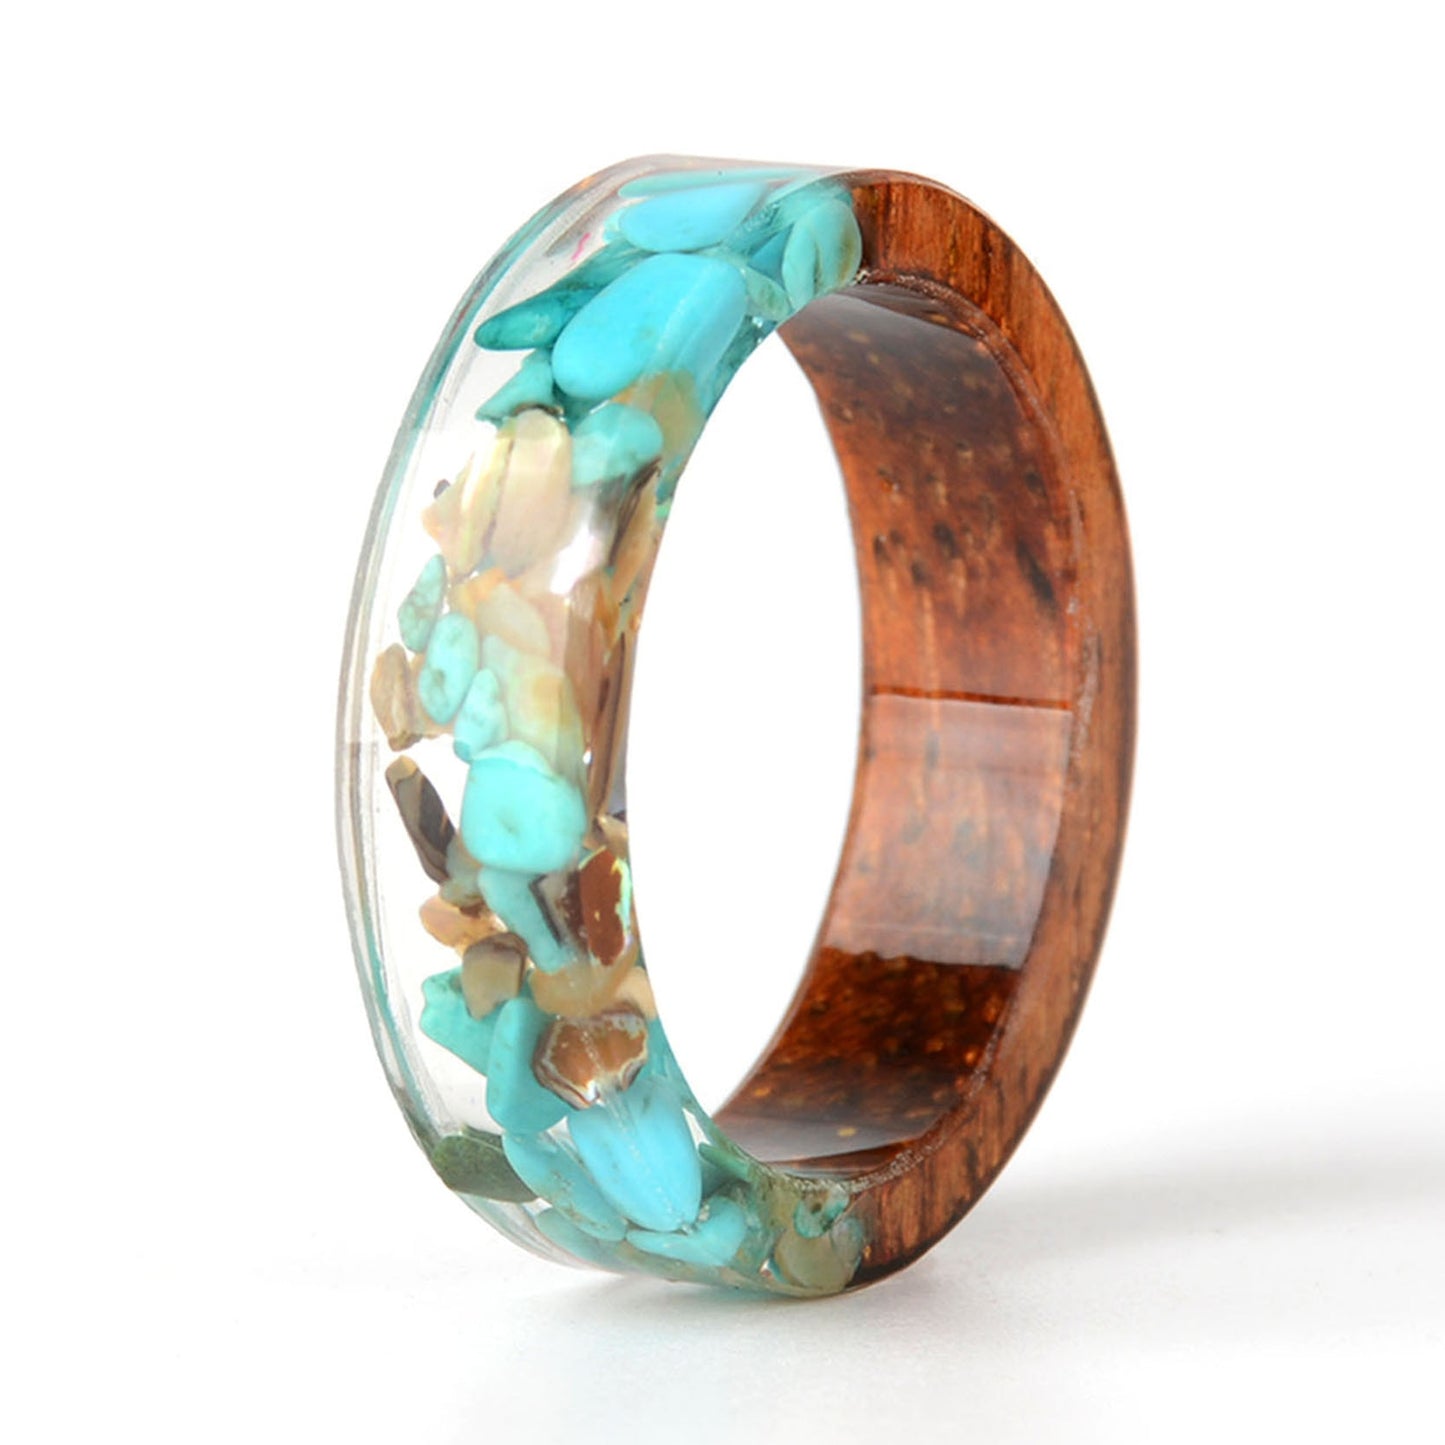 Handmade DIY romantic dry flower Real wood resin ring gifts for the lover